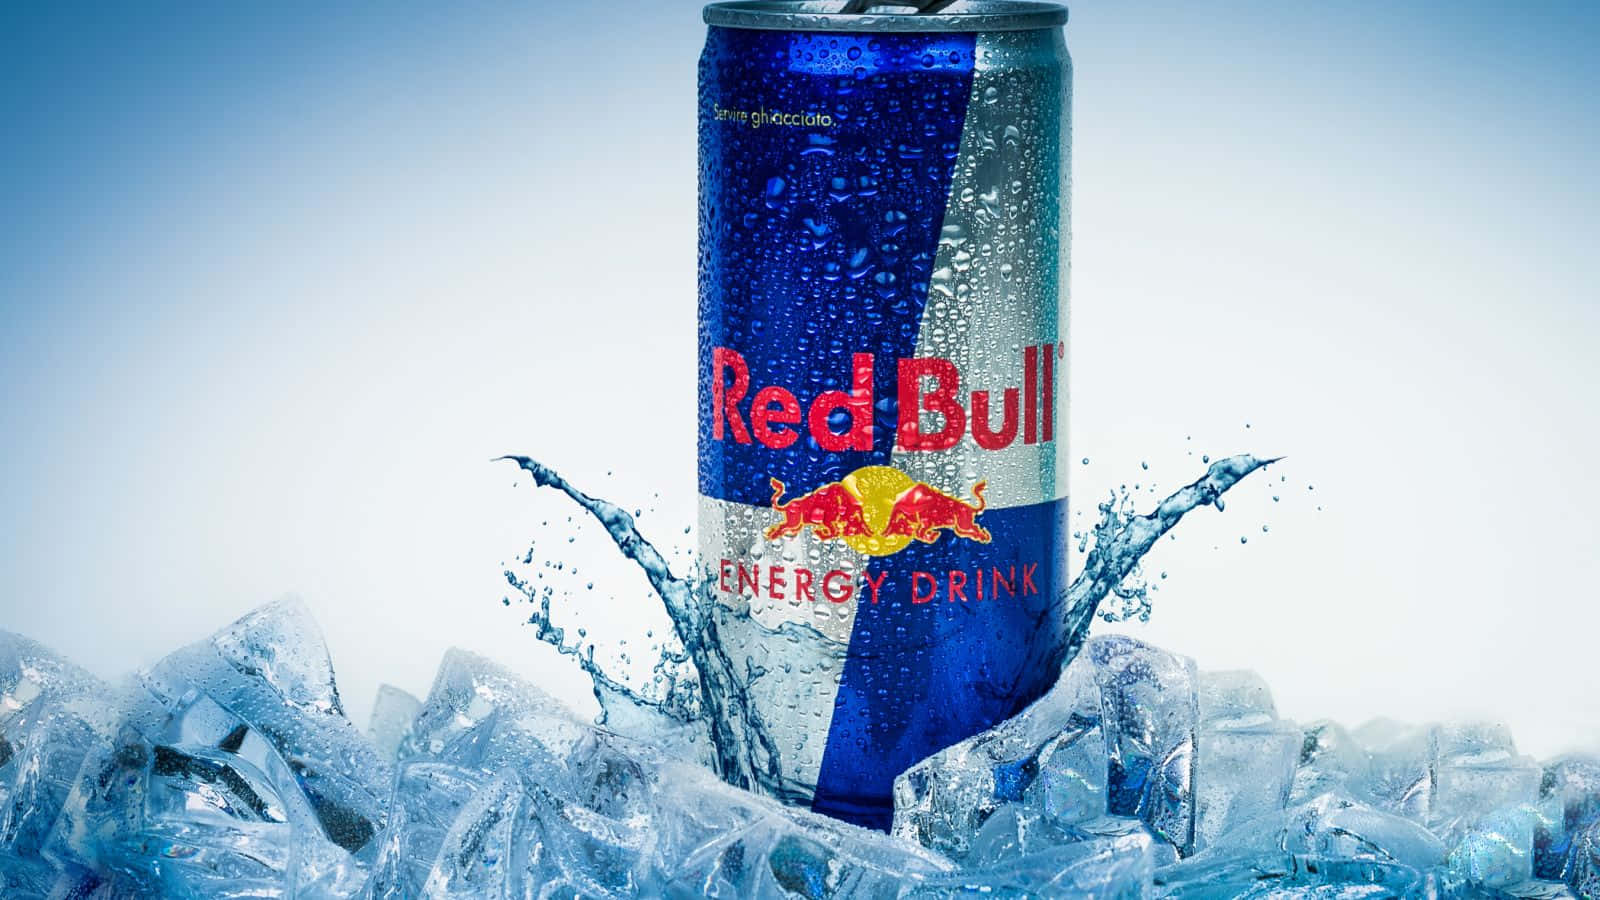 Take Flight With Red Bull!